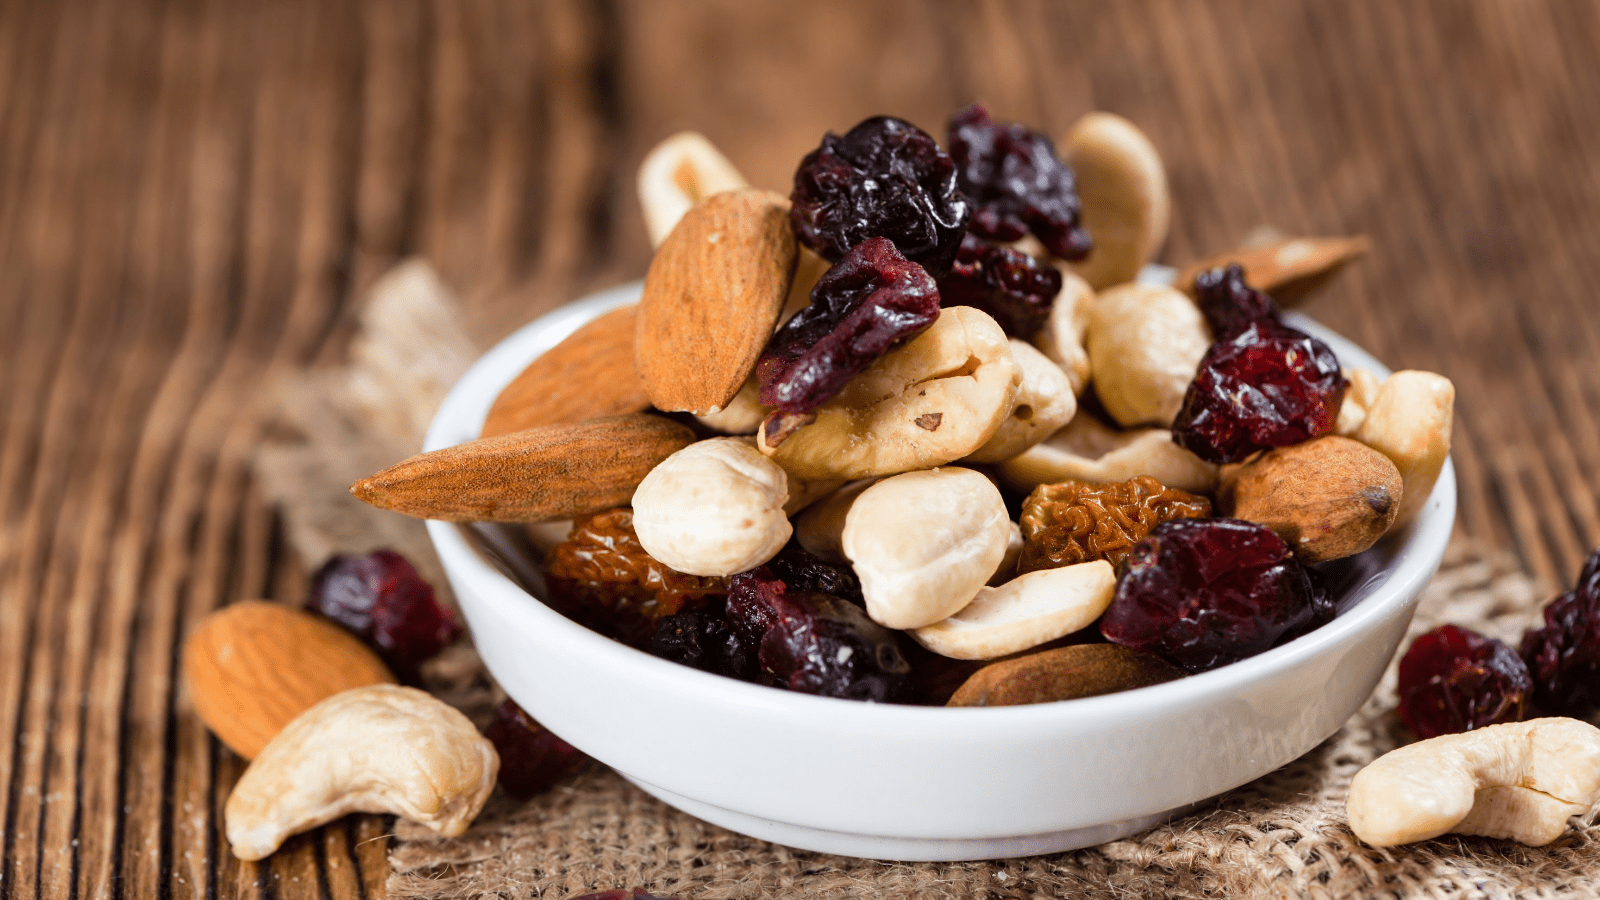 Trail mix nutrition | Gapin Institute